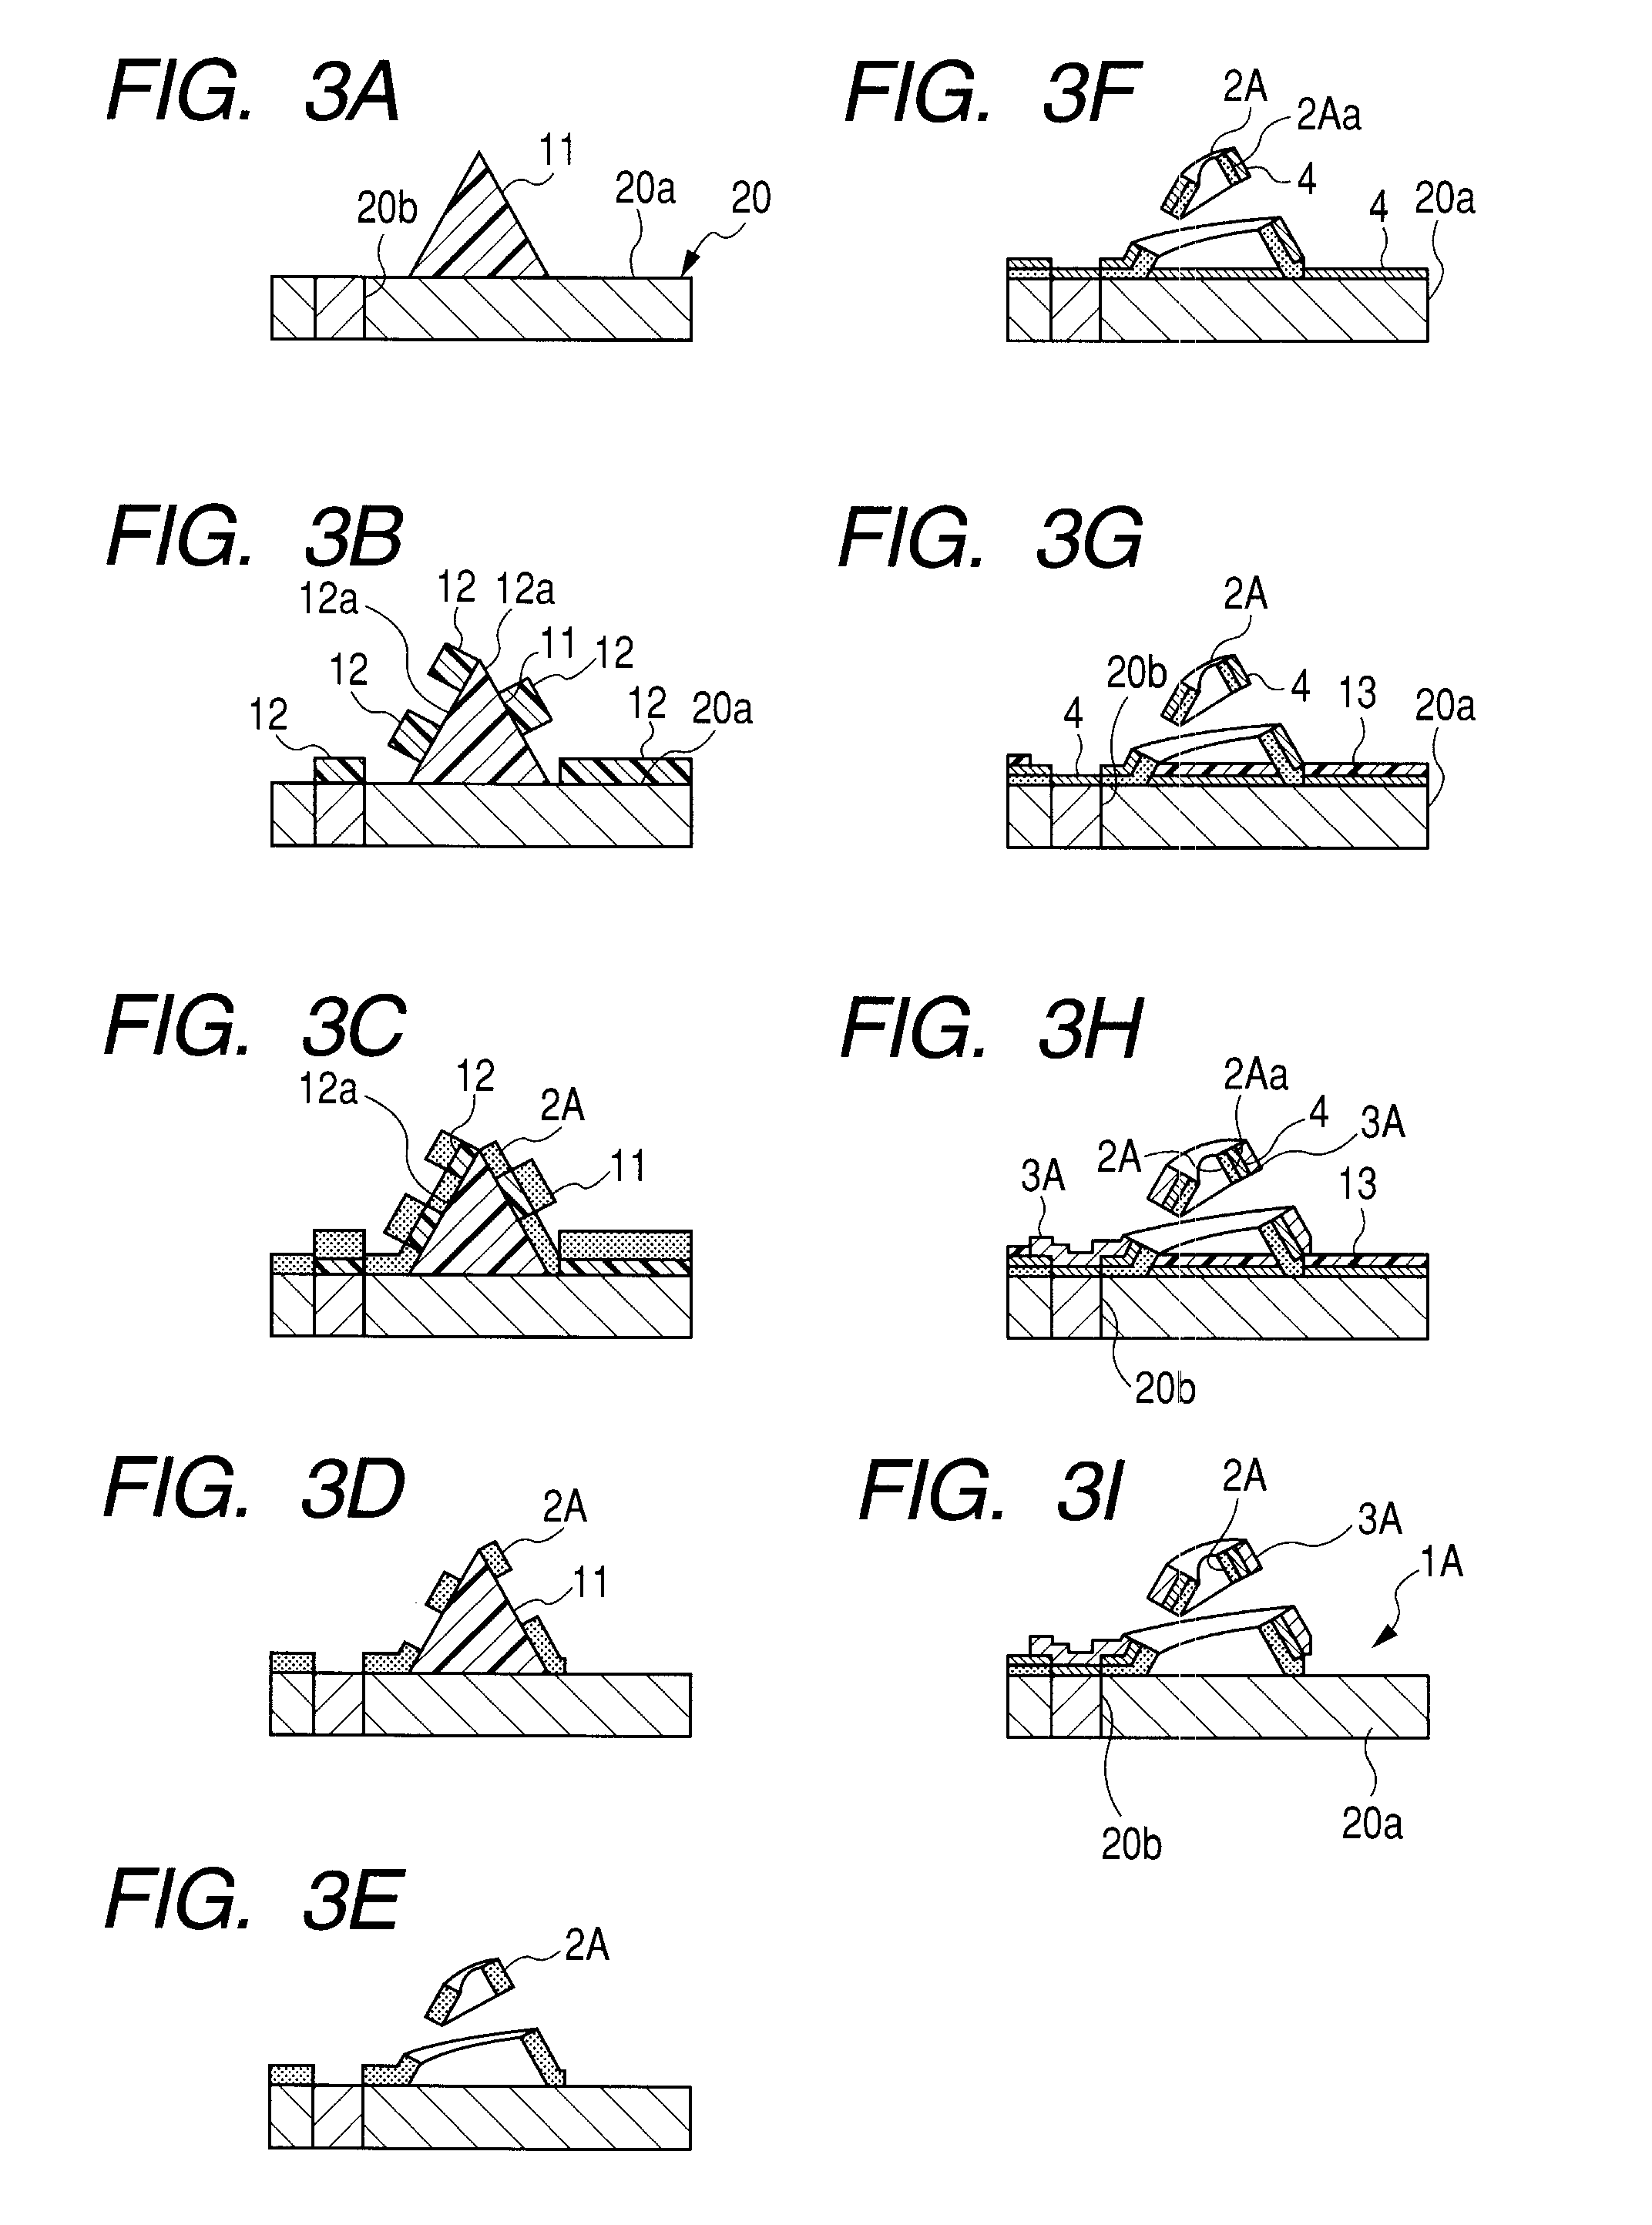 Contact made of ceramic and its manufacturing method